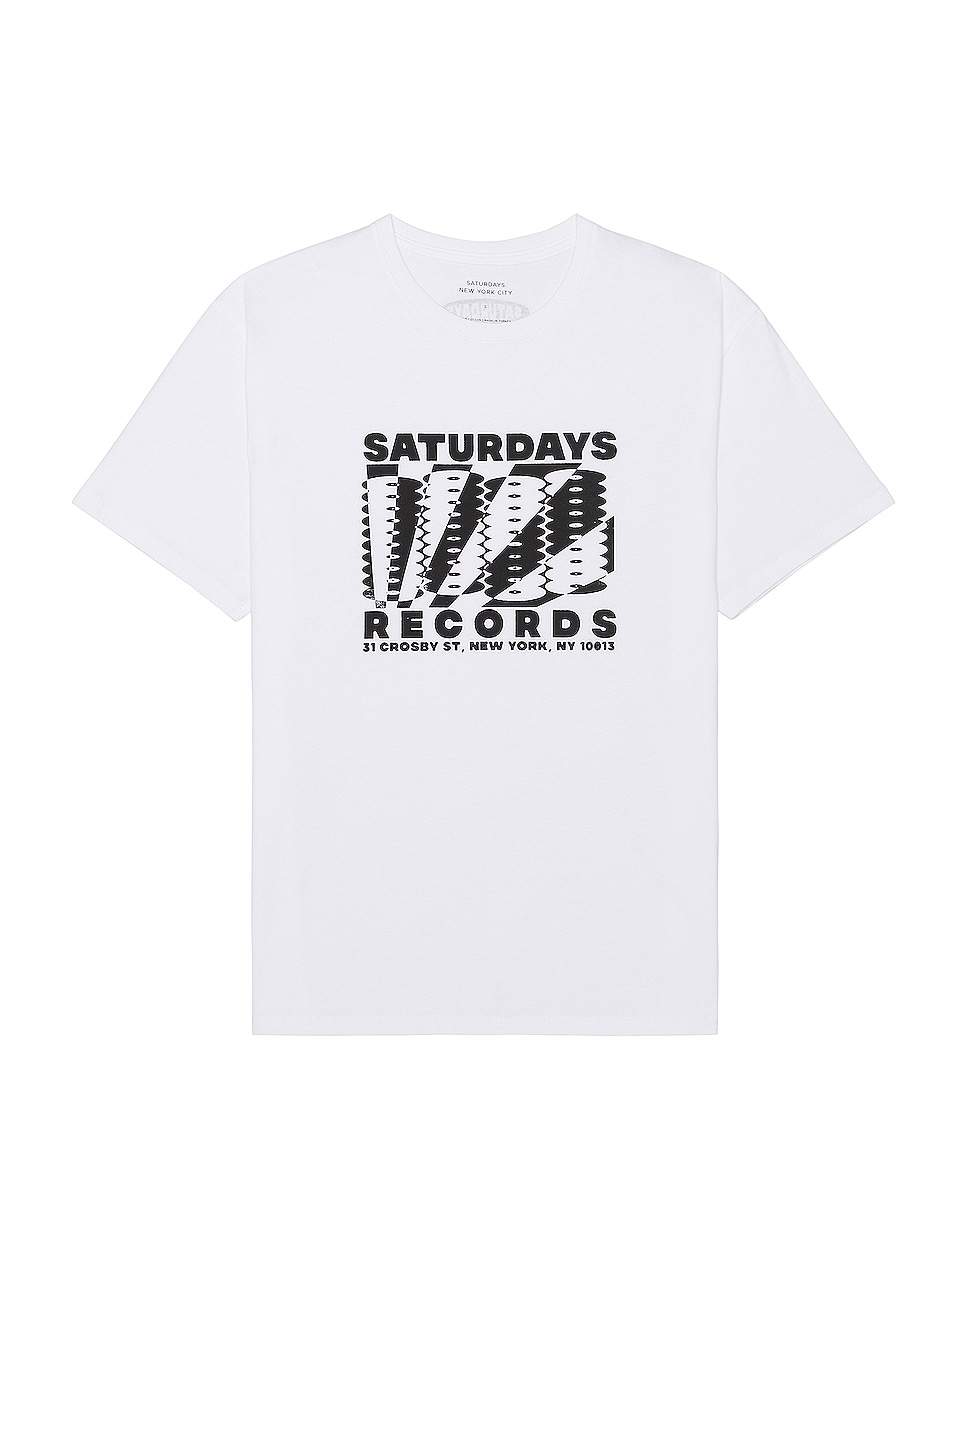 Image 1 of SATURDAYS NYC Records Tee in White